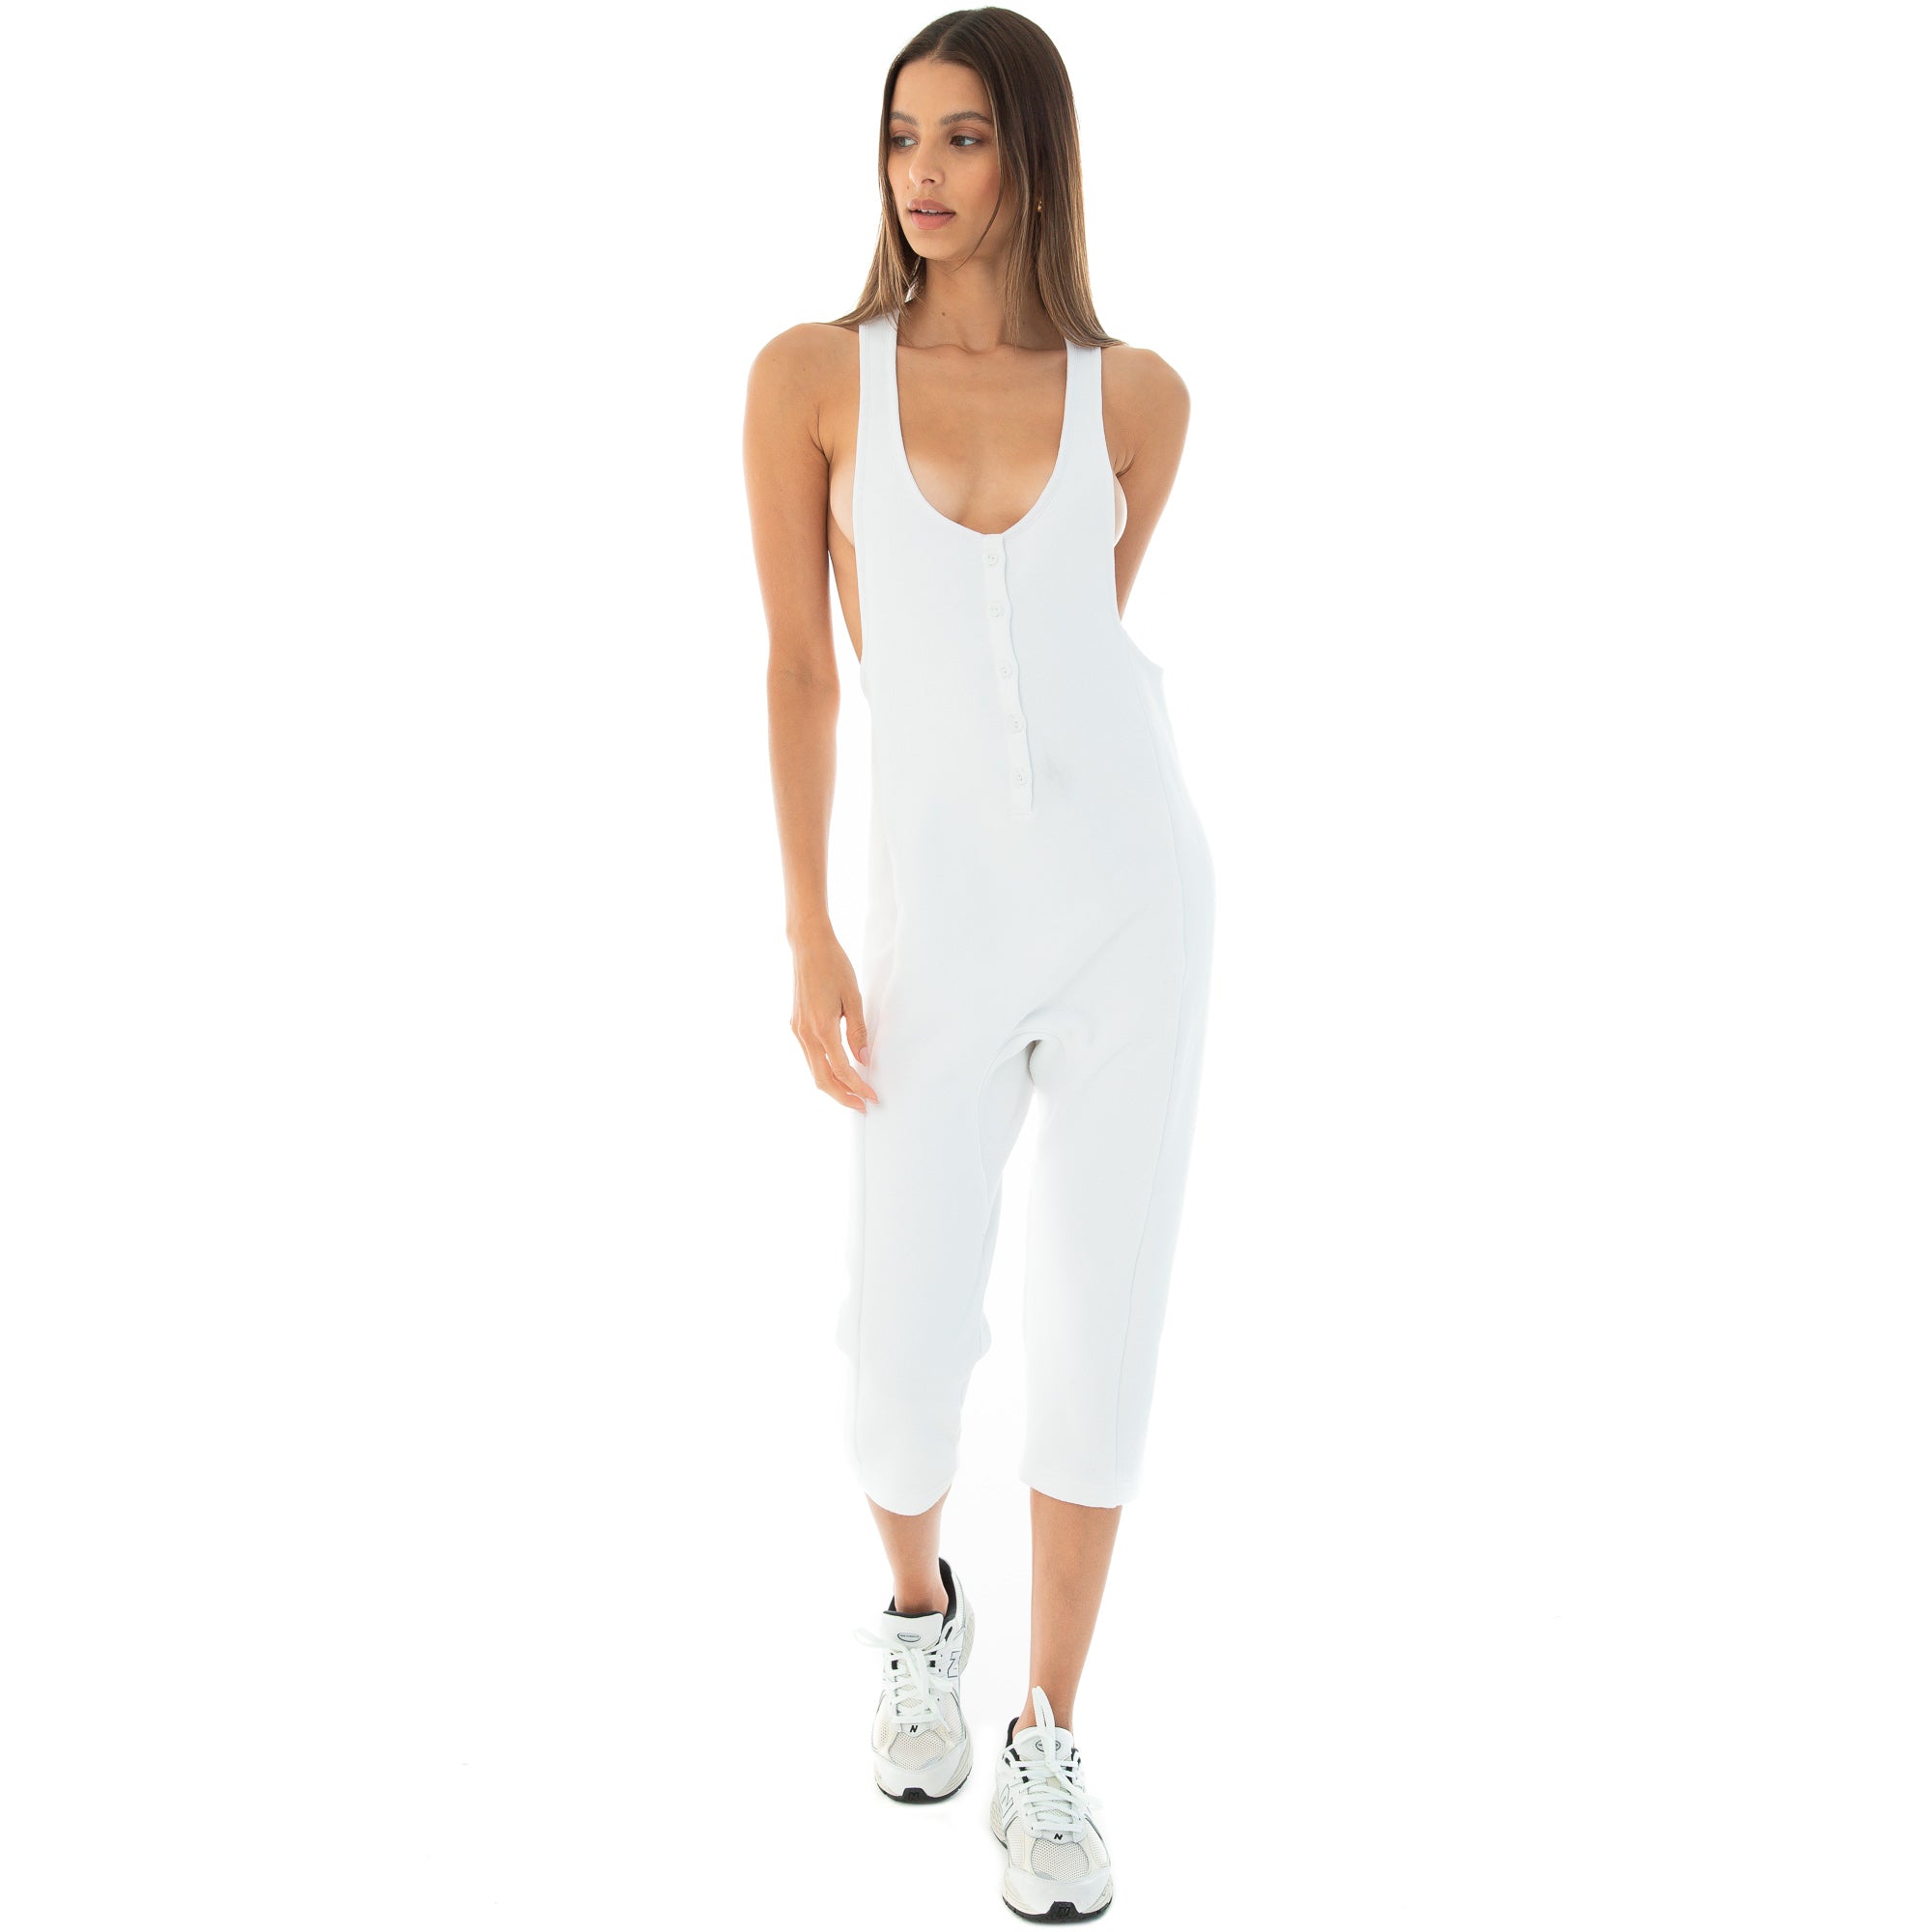 Are You Am I - Sikka Jumpsuit **white